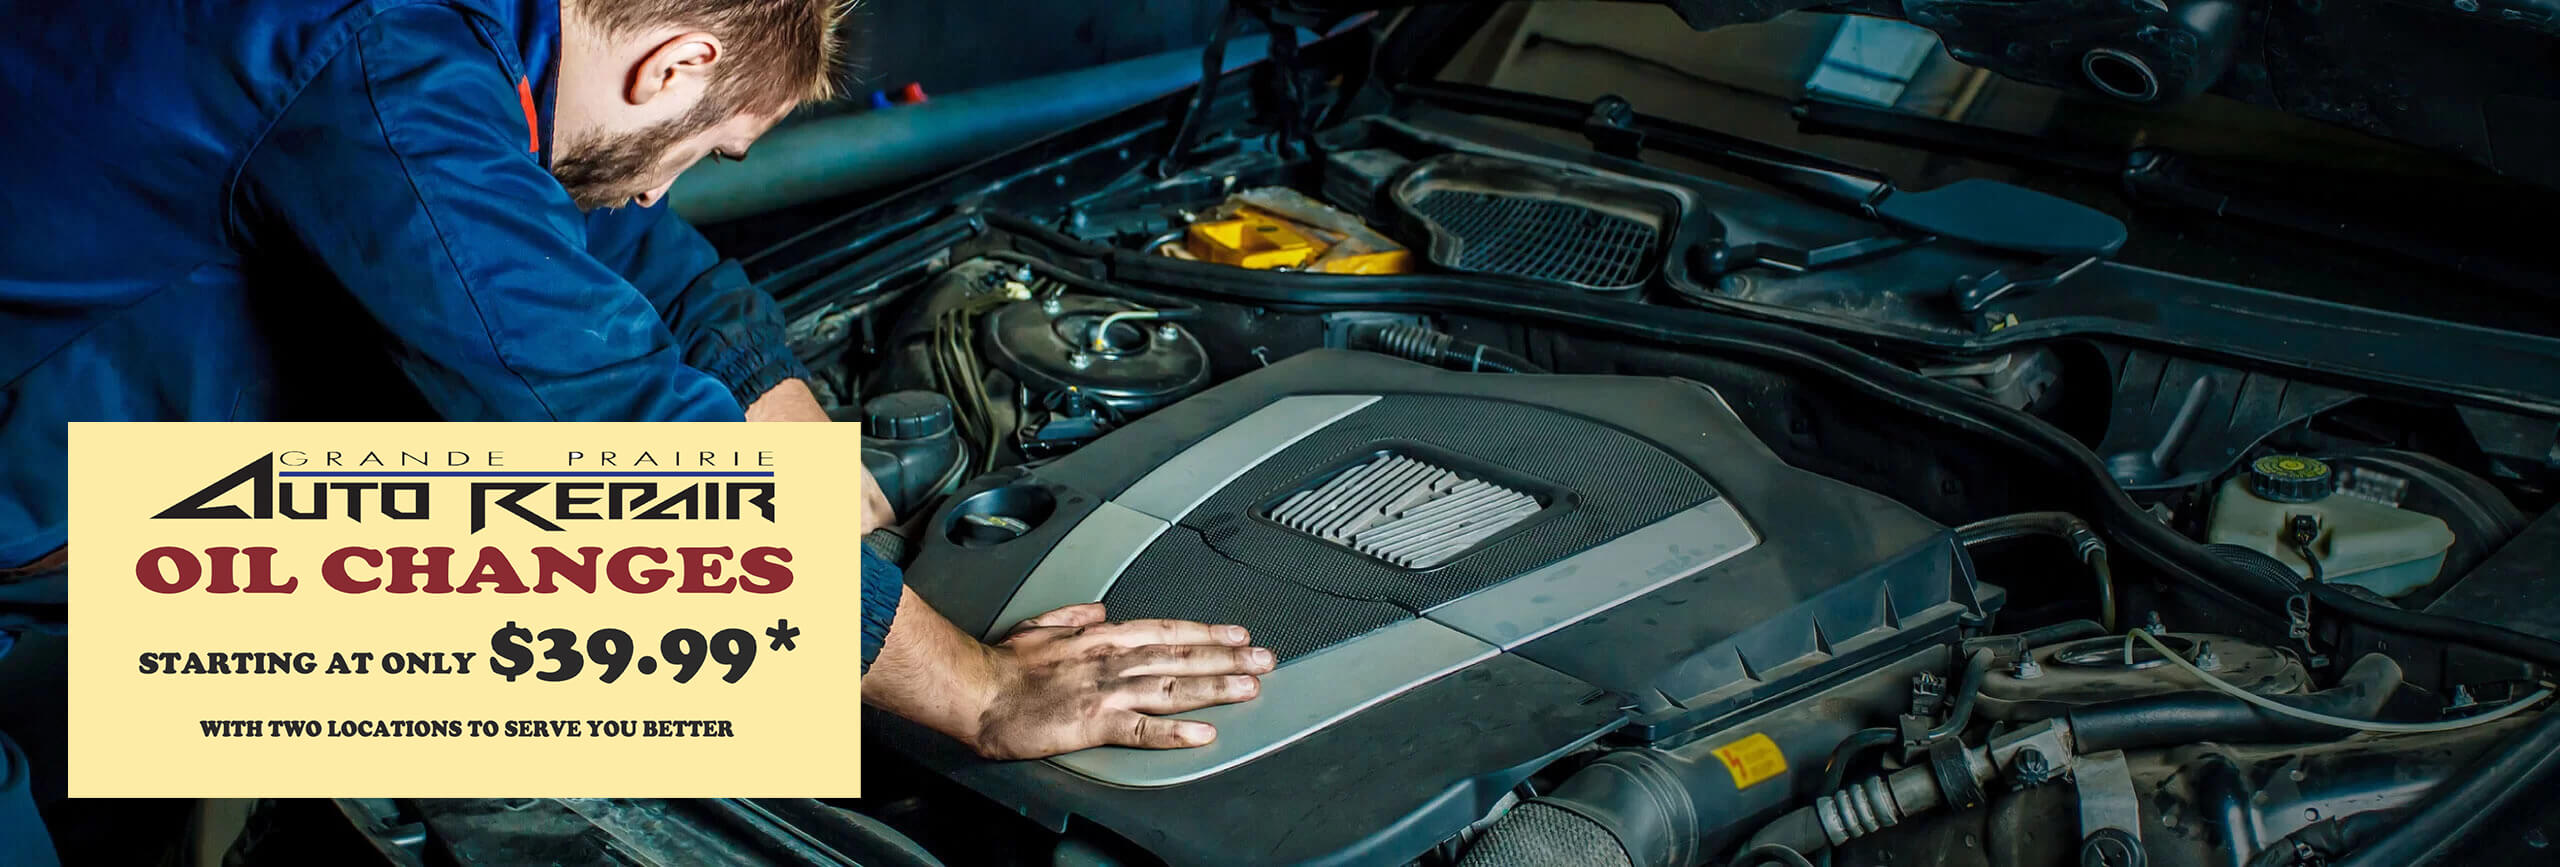 Oil Change Special - Only $39.99